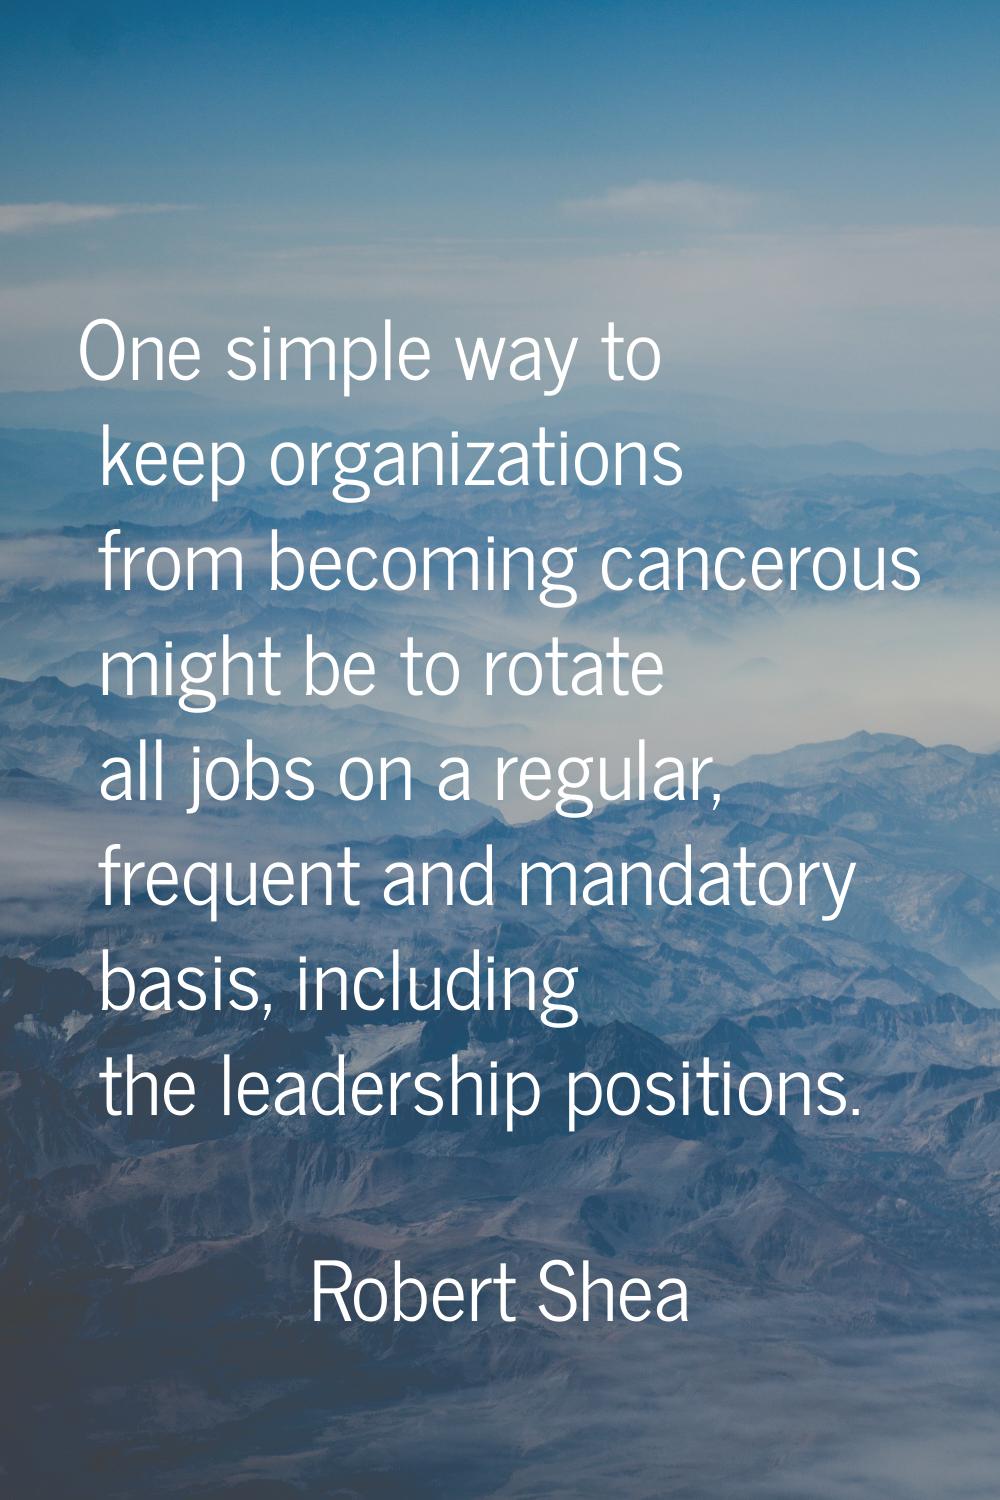 One simple way to keep organizations from becoming cancerous might be to rotate all jobs on a regul